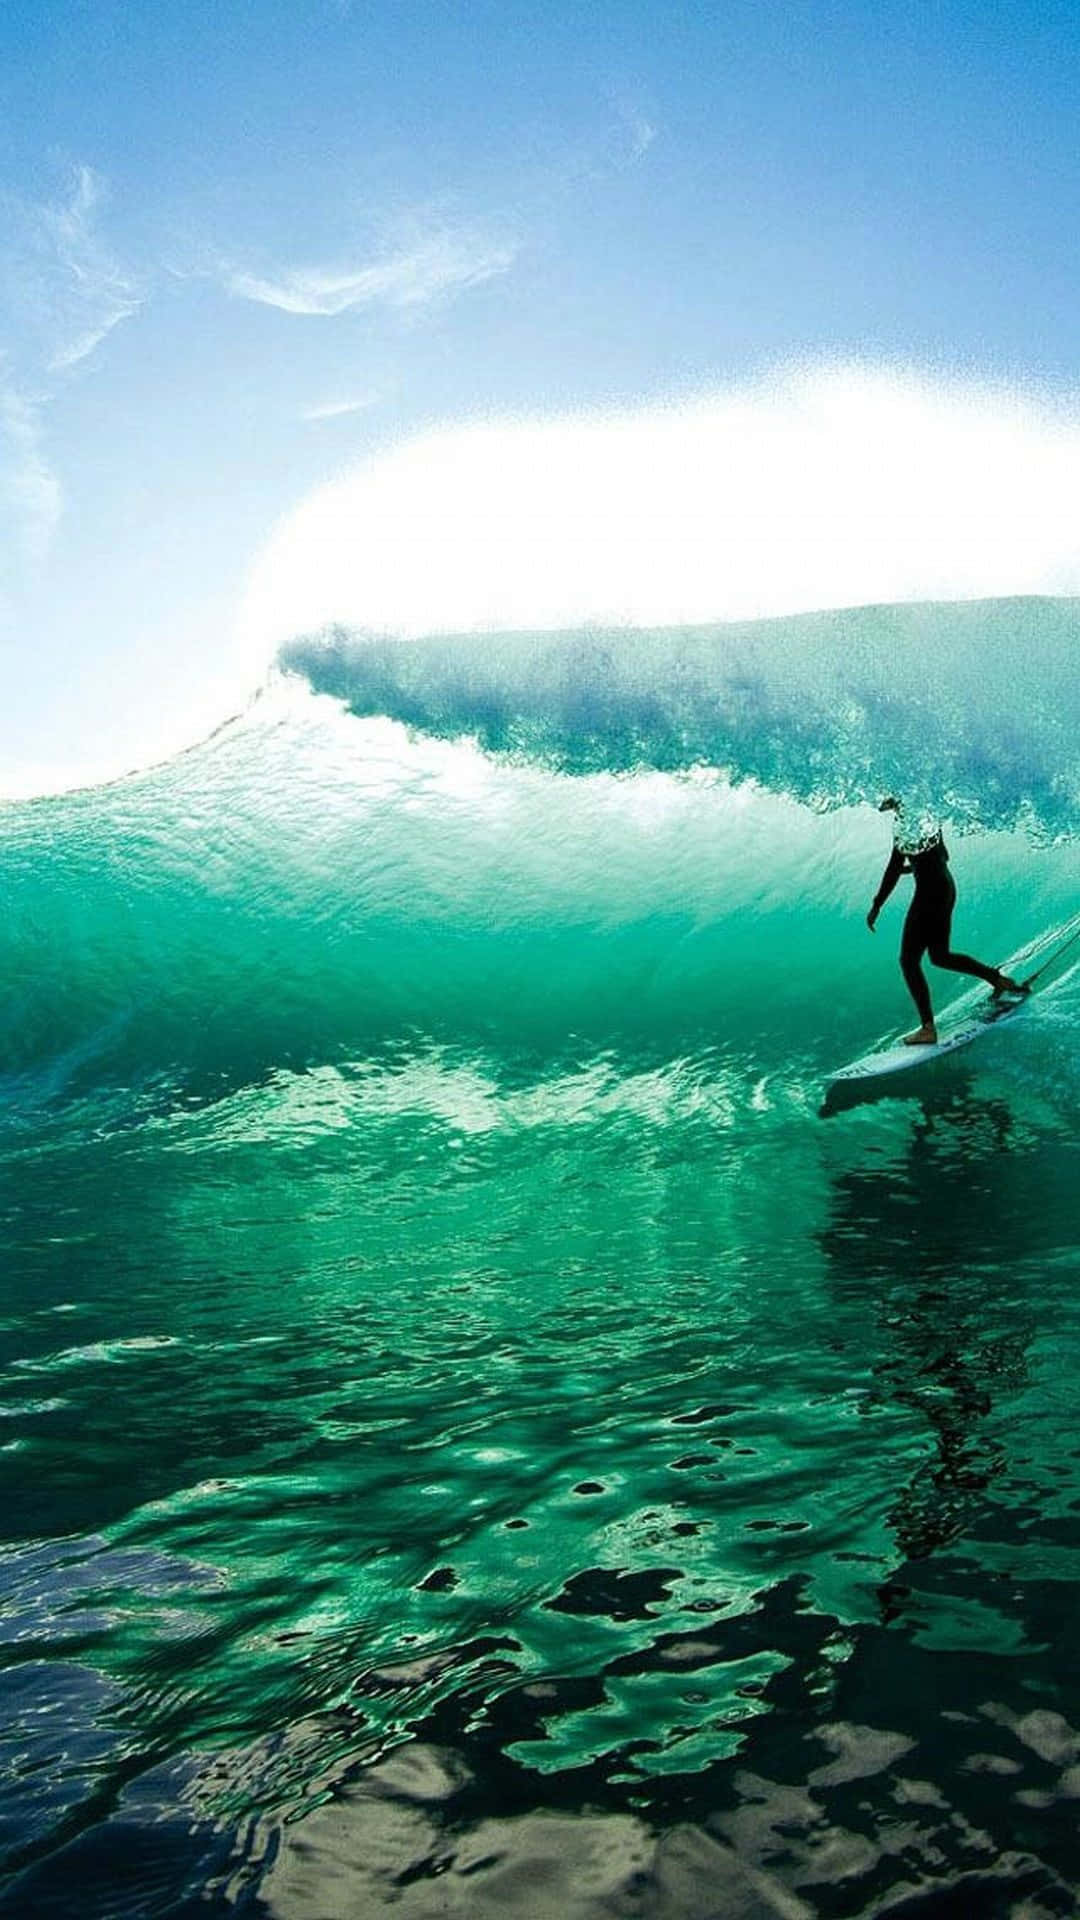 Catch a Wave with the New Surfing Iphone Wallpaper